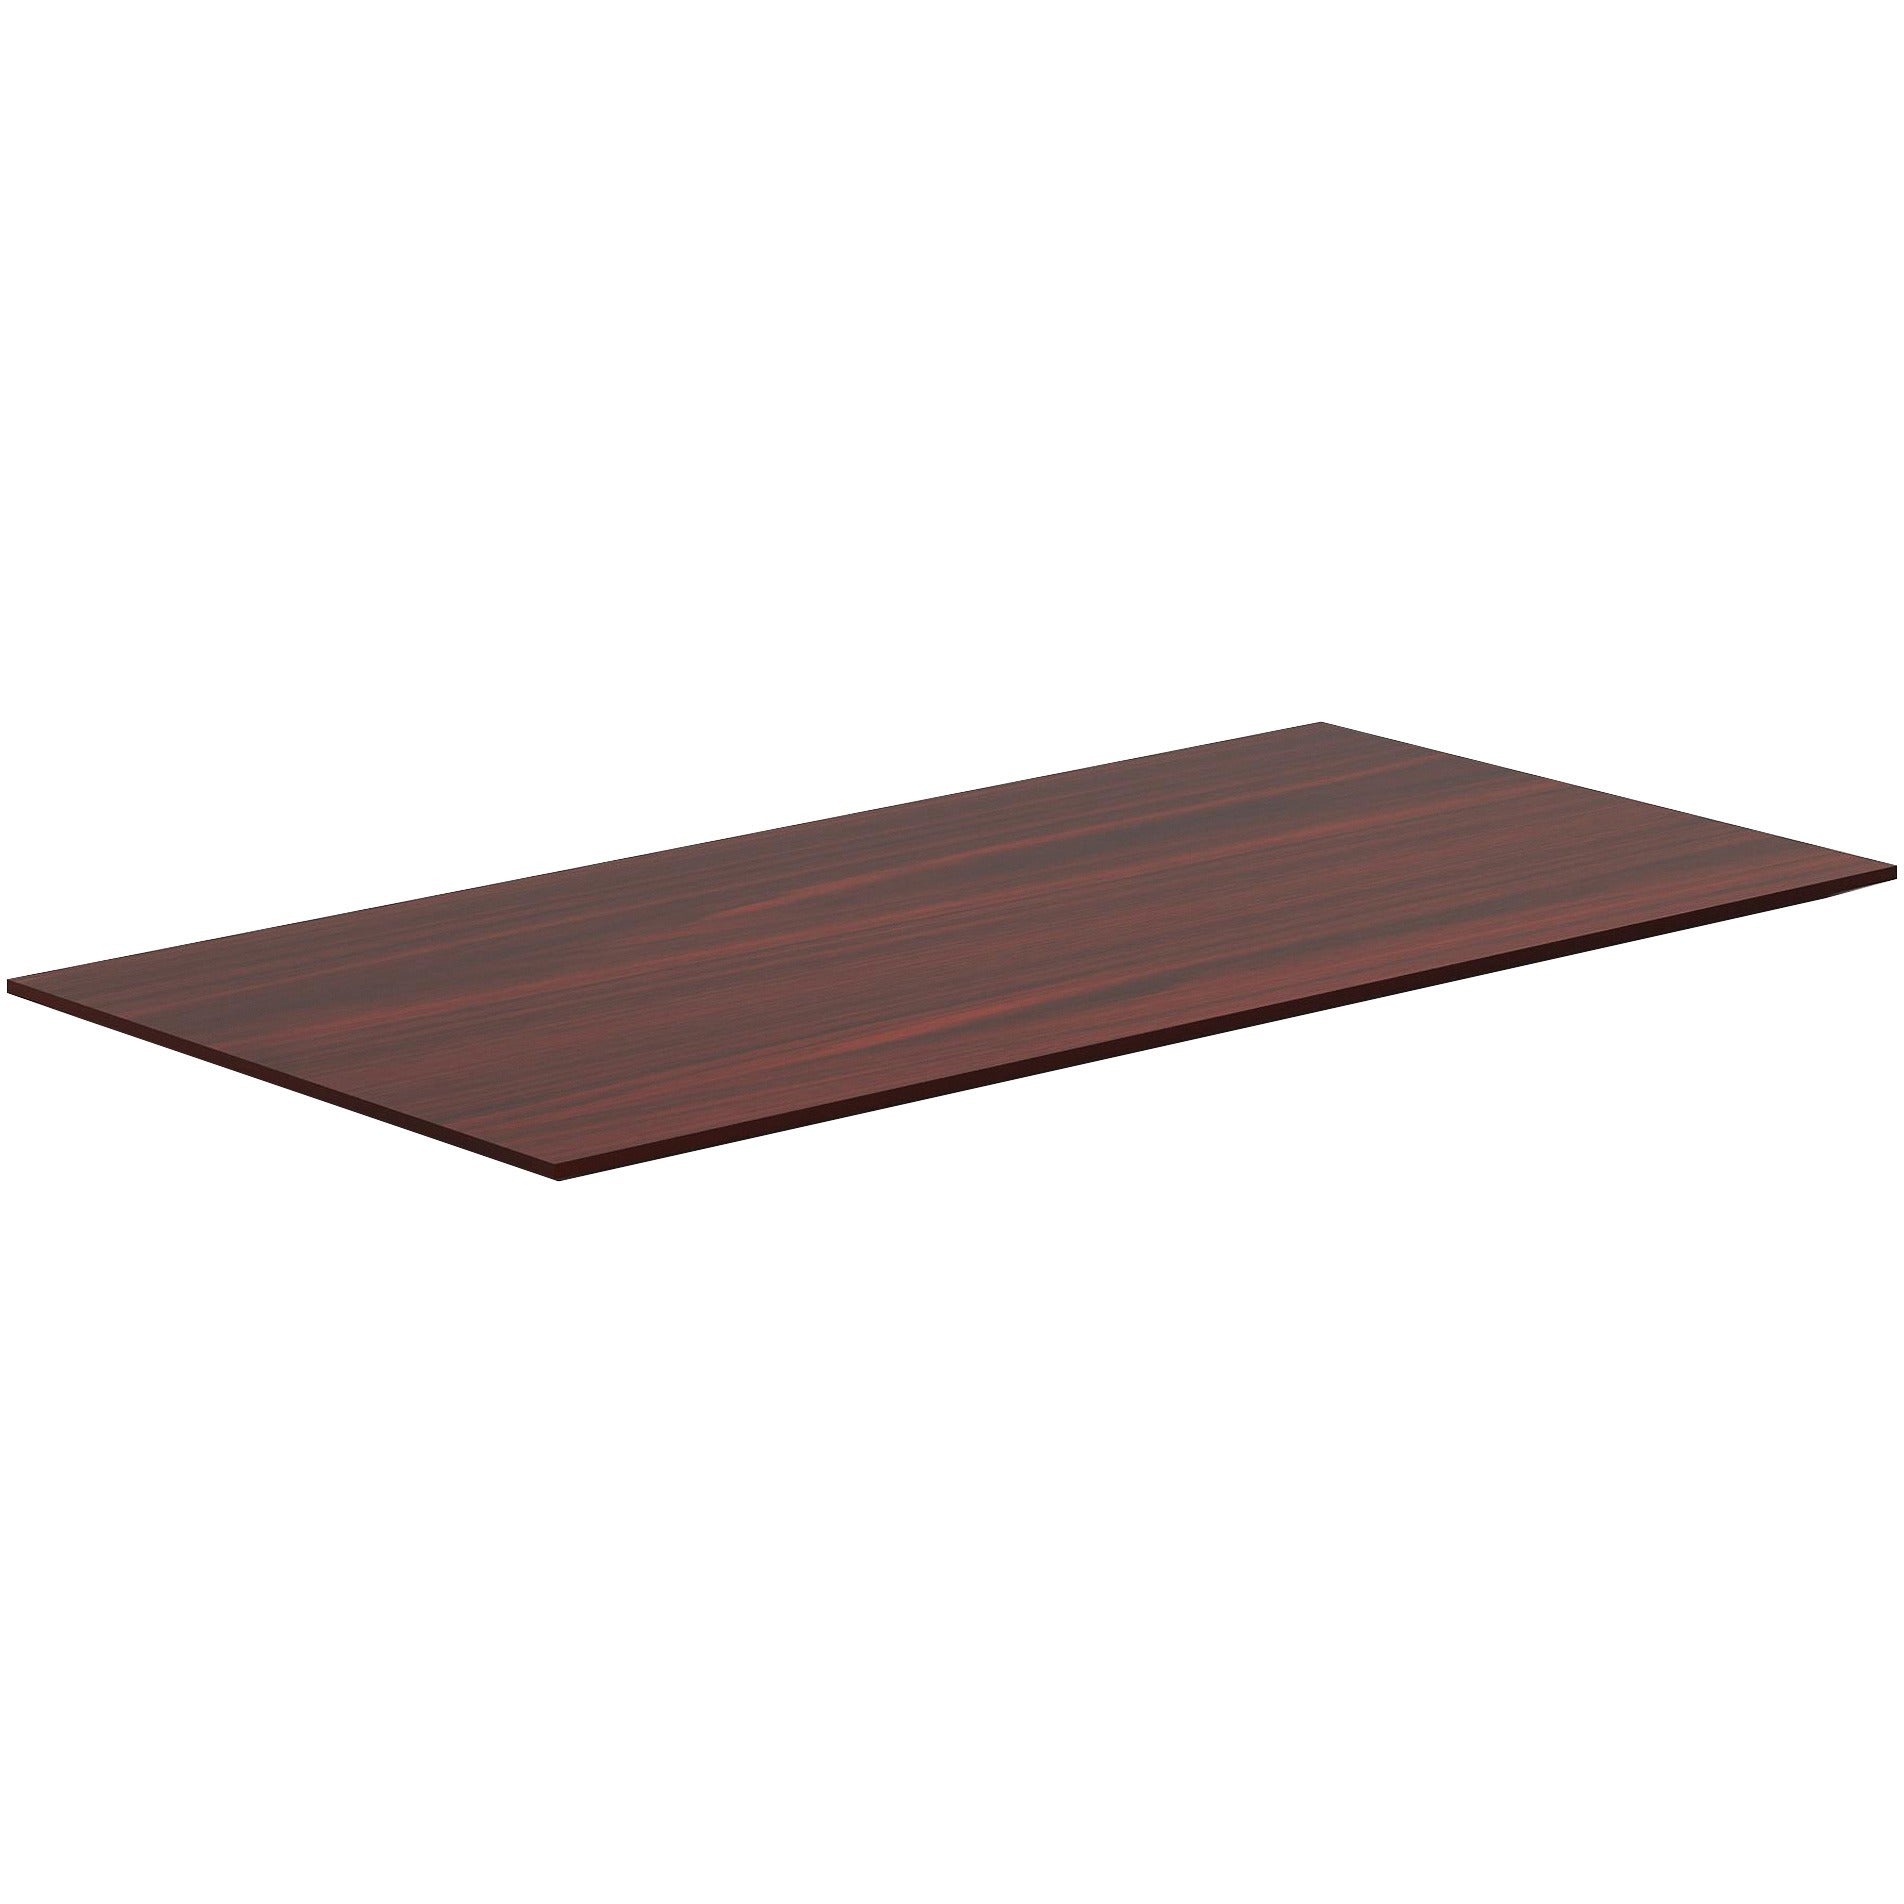 Lorell Relevance Series Tabletop - For - Table TopLaminated Rectangle, Mahogany Top x 72" Table Top Width x 24" Table Top Depth x 1" Table Top Thickness x 71.63" Width x 23.63" Depth - 1 Each - 